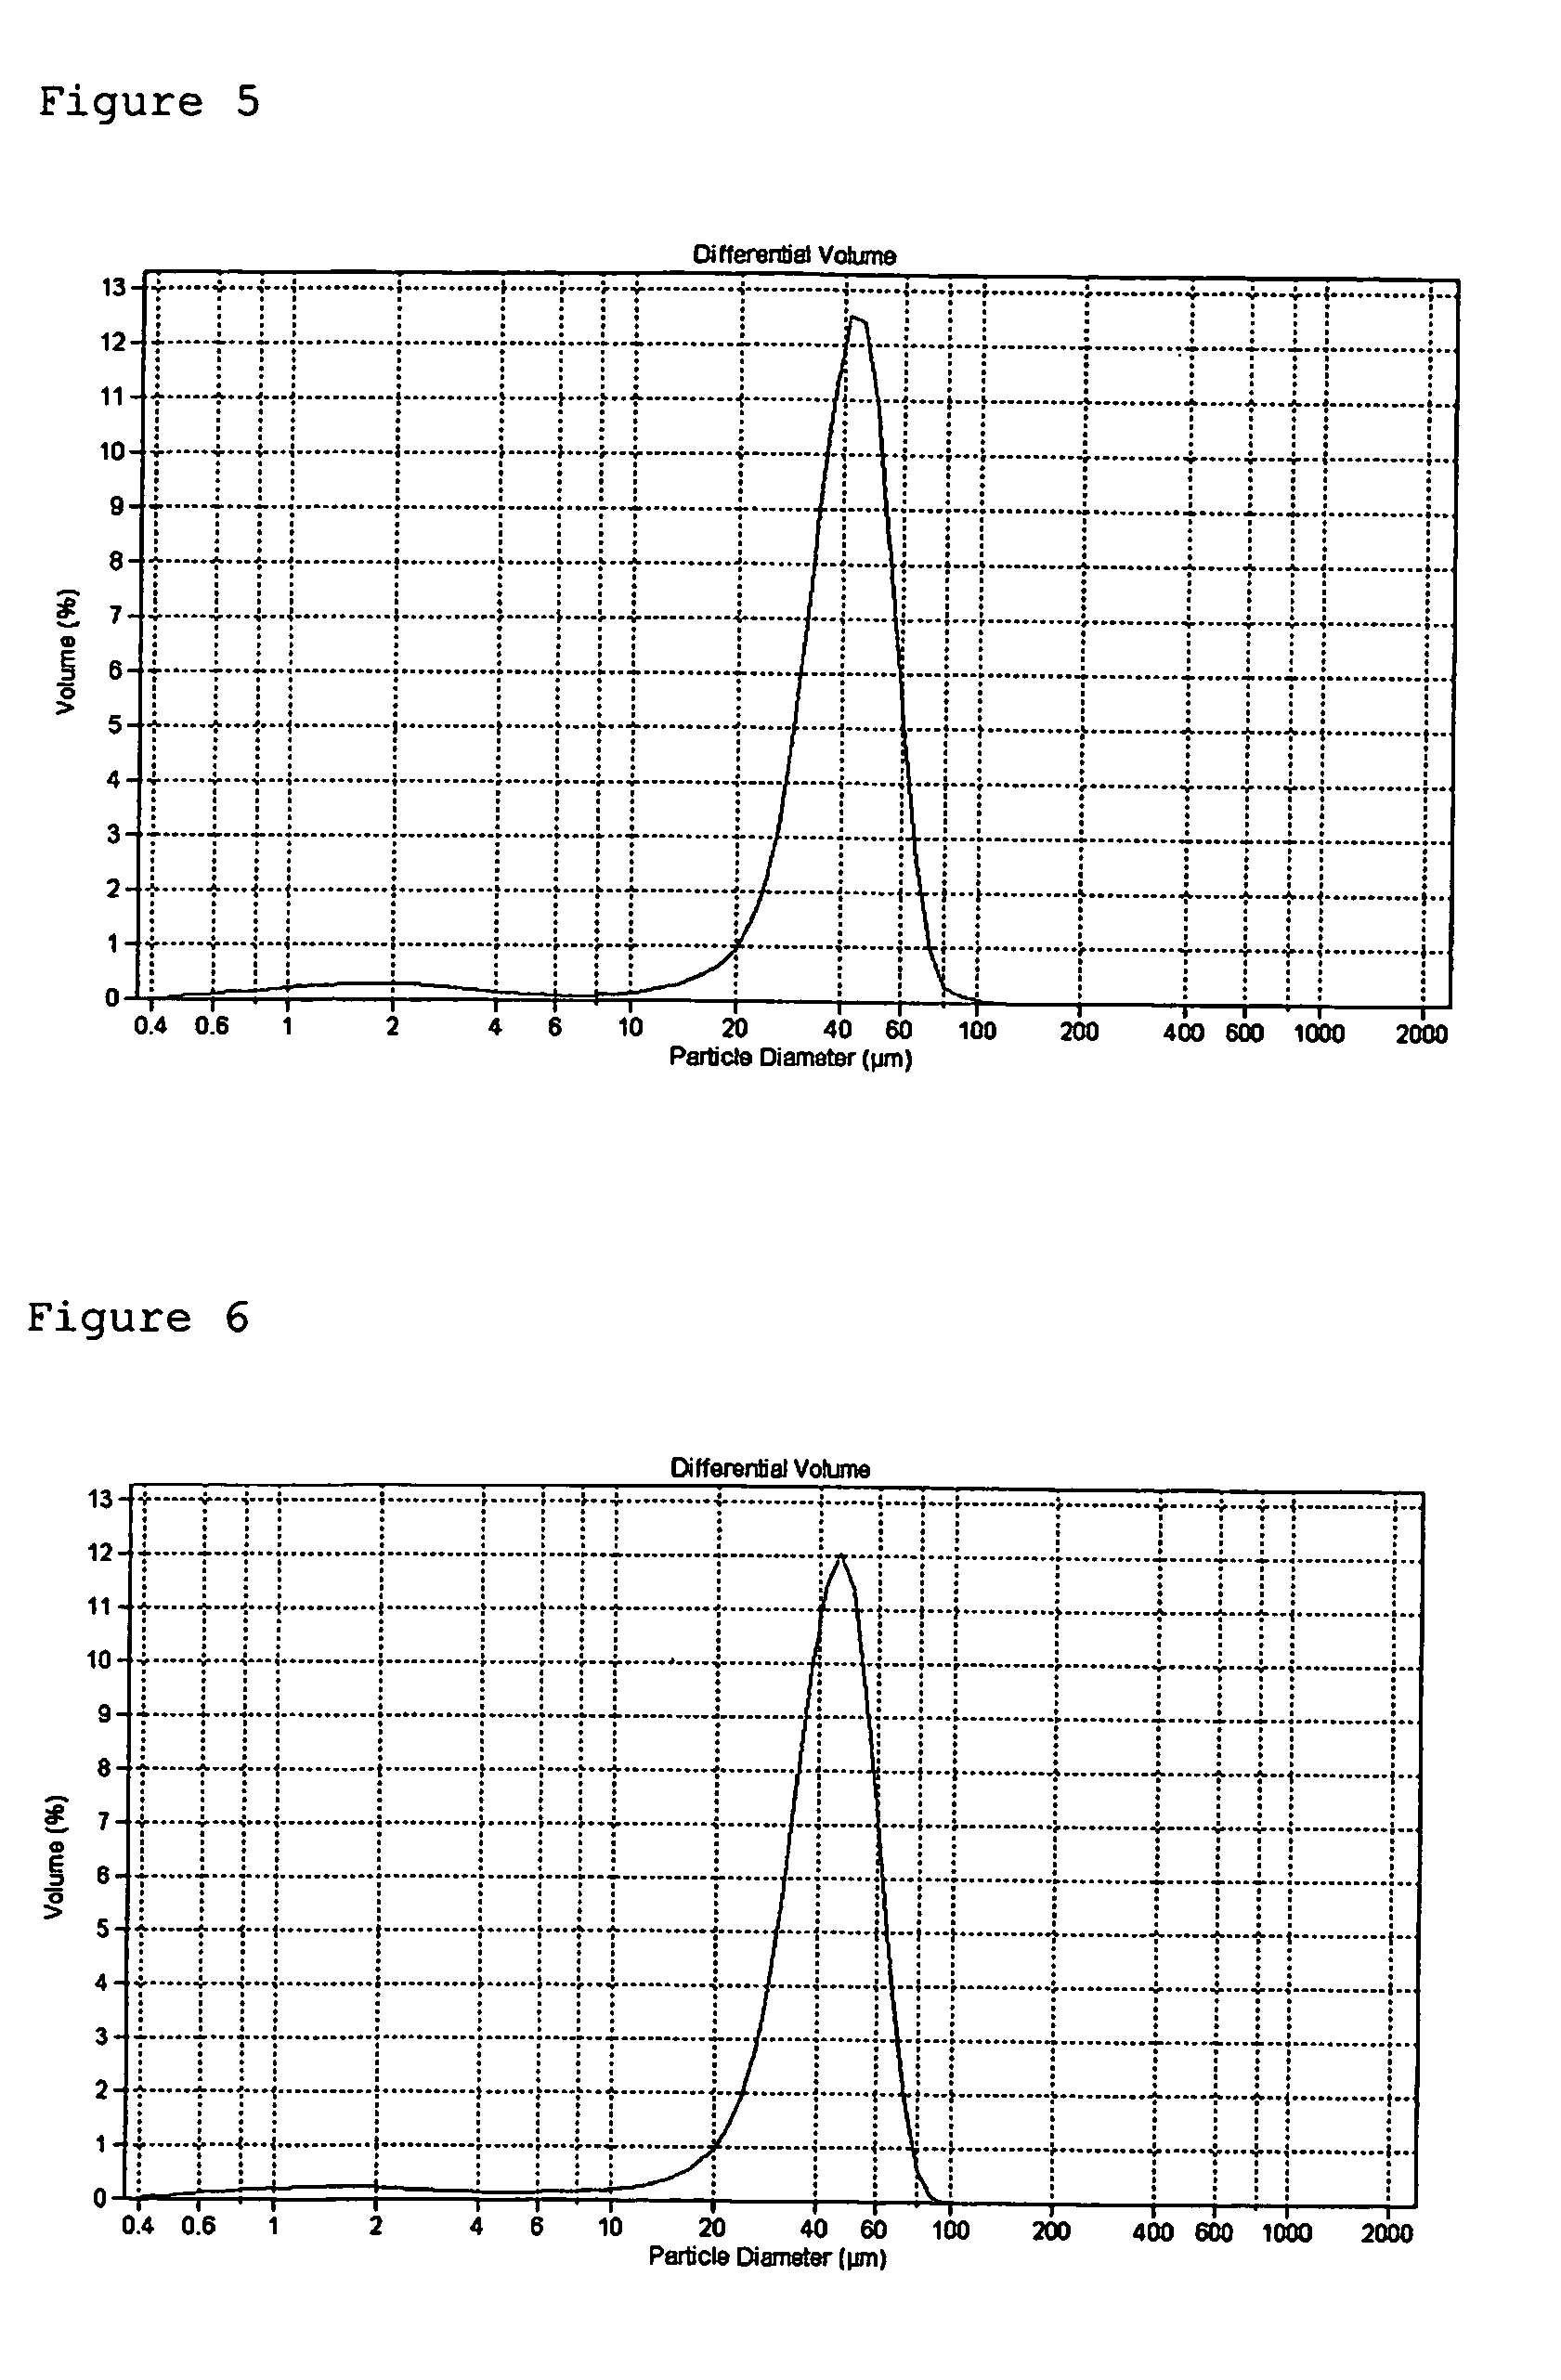 Process for preparing an olefin polymerization catalyst component